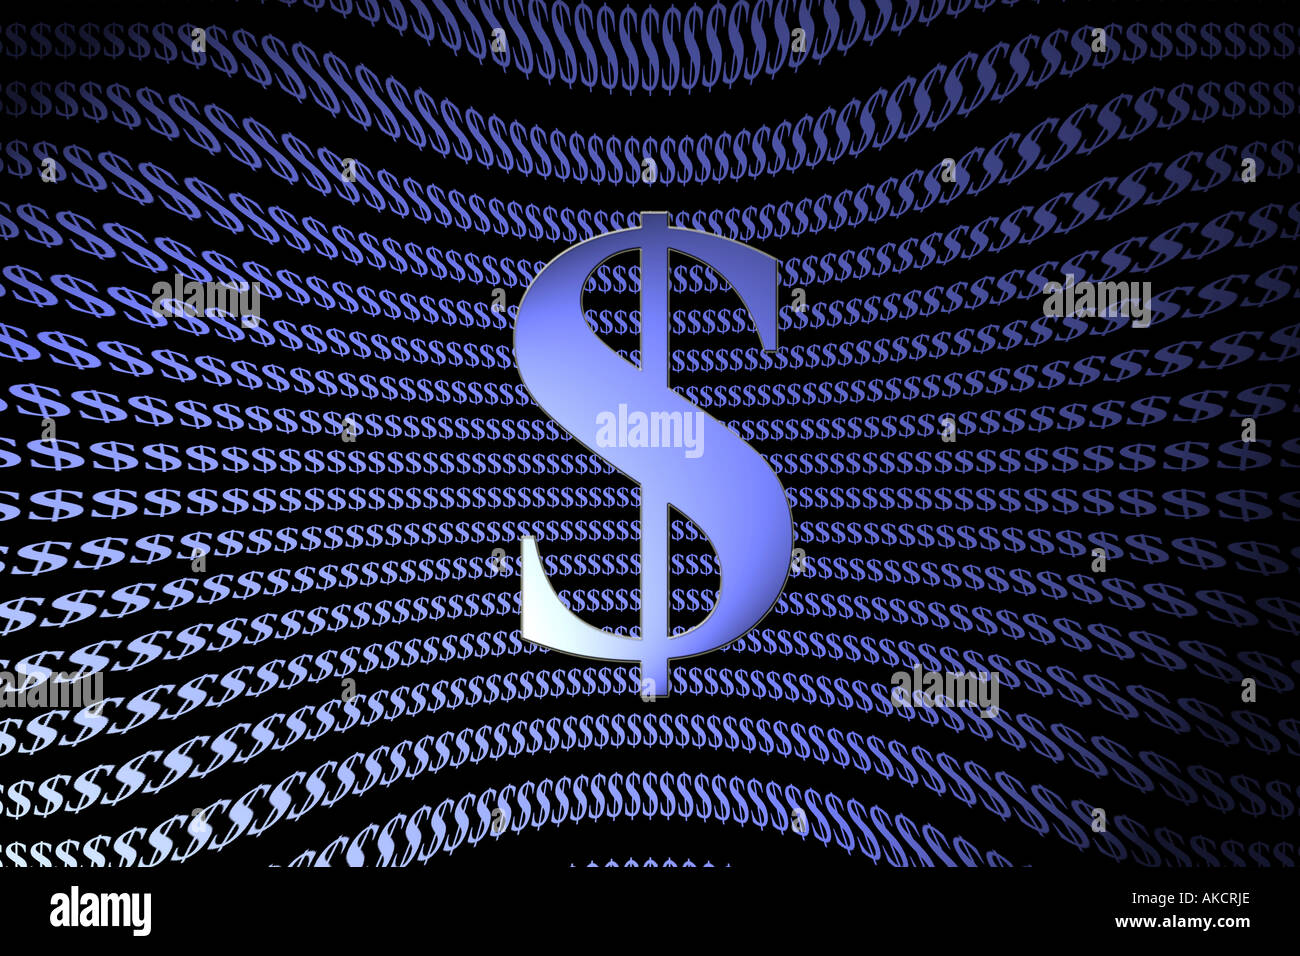 A Stock Photograph of a graphical illustration of the Dollar sign Stock Photo